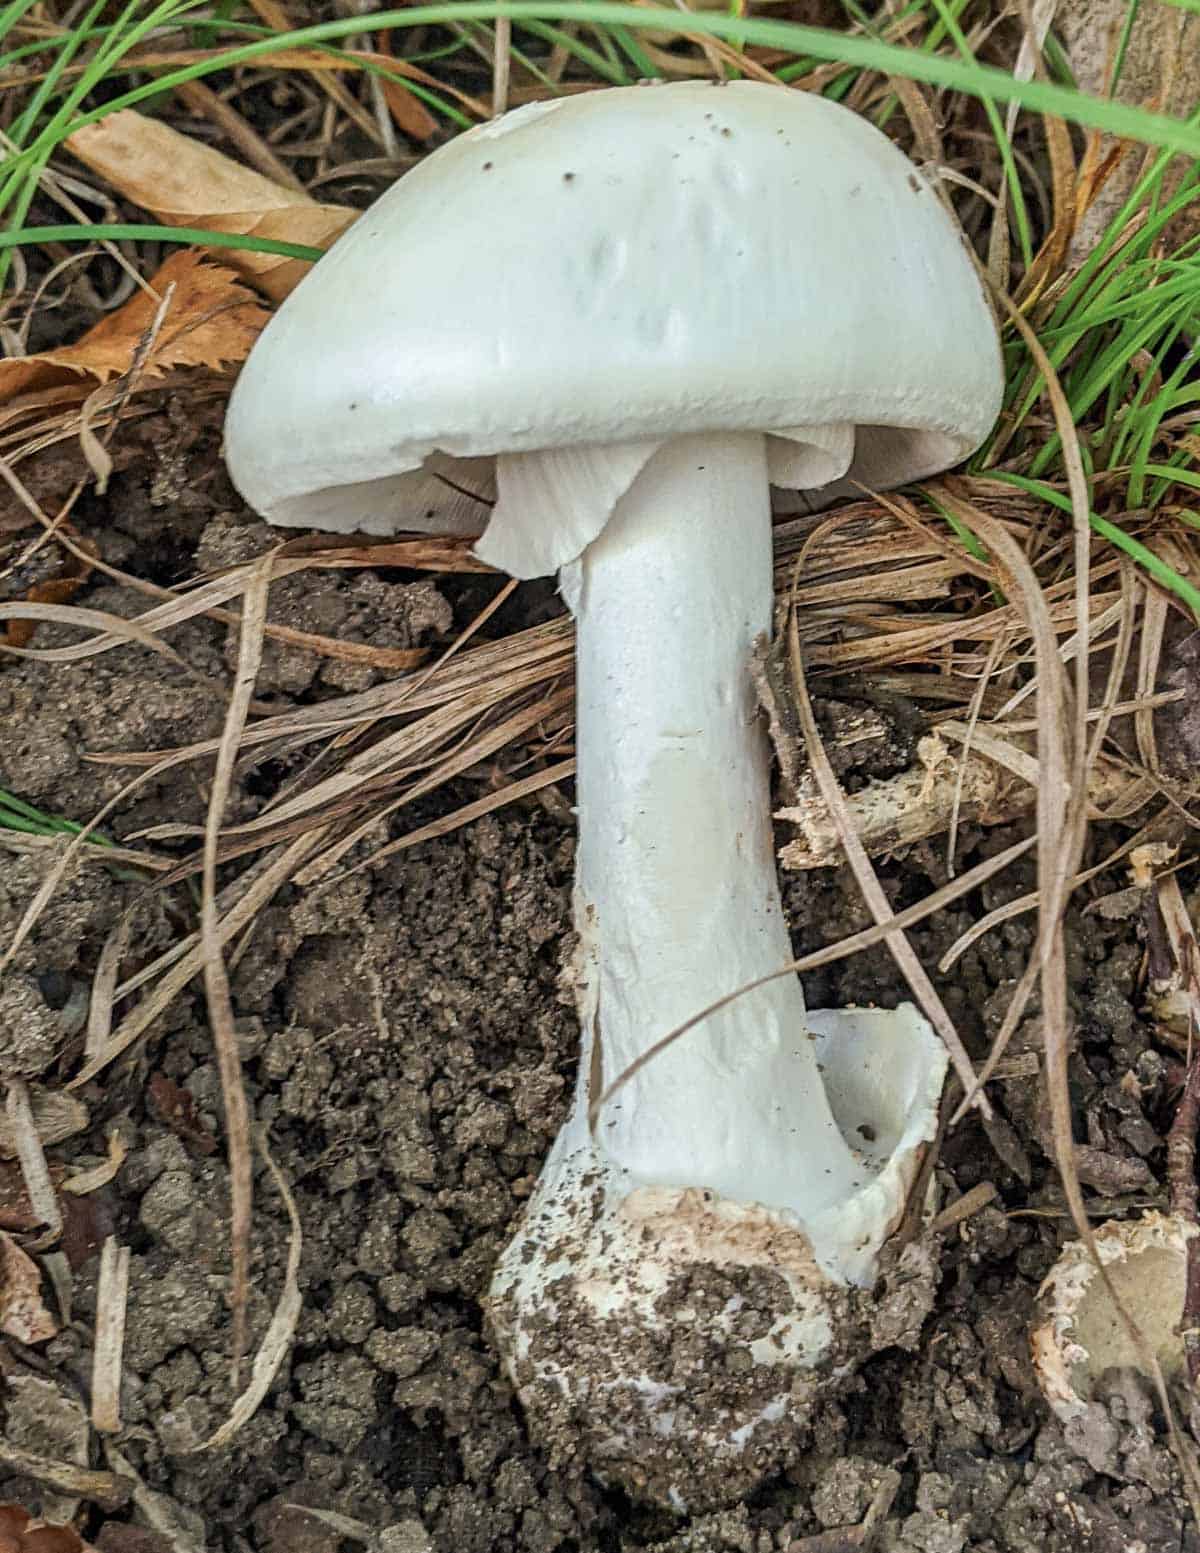 A close up image of destroying angel amanita for identification purposes showing the volva and annulus.